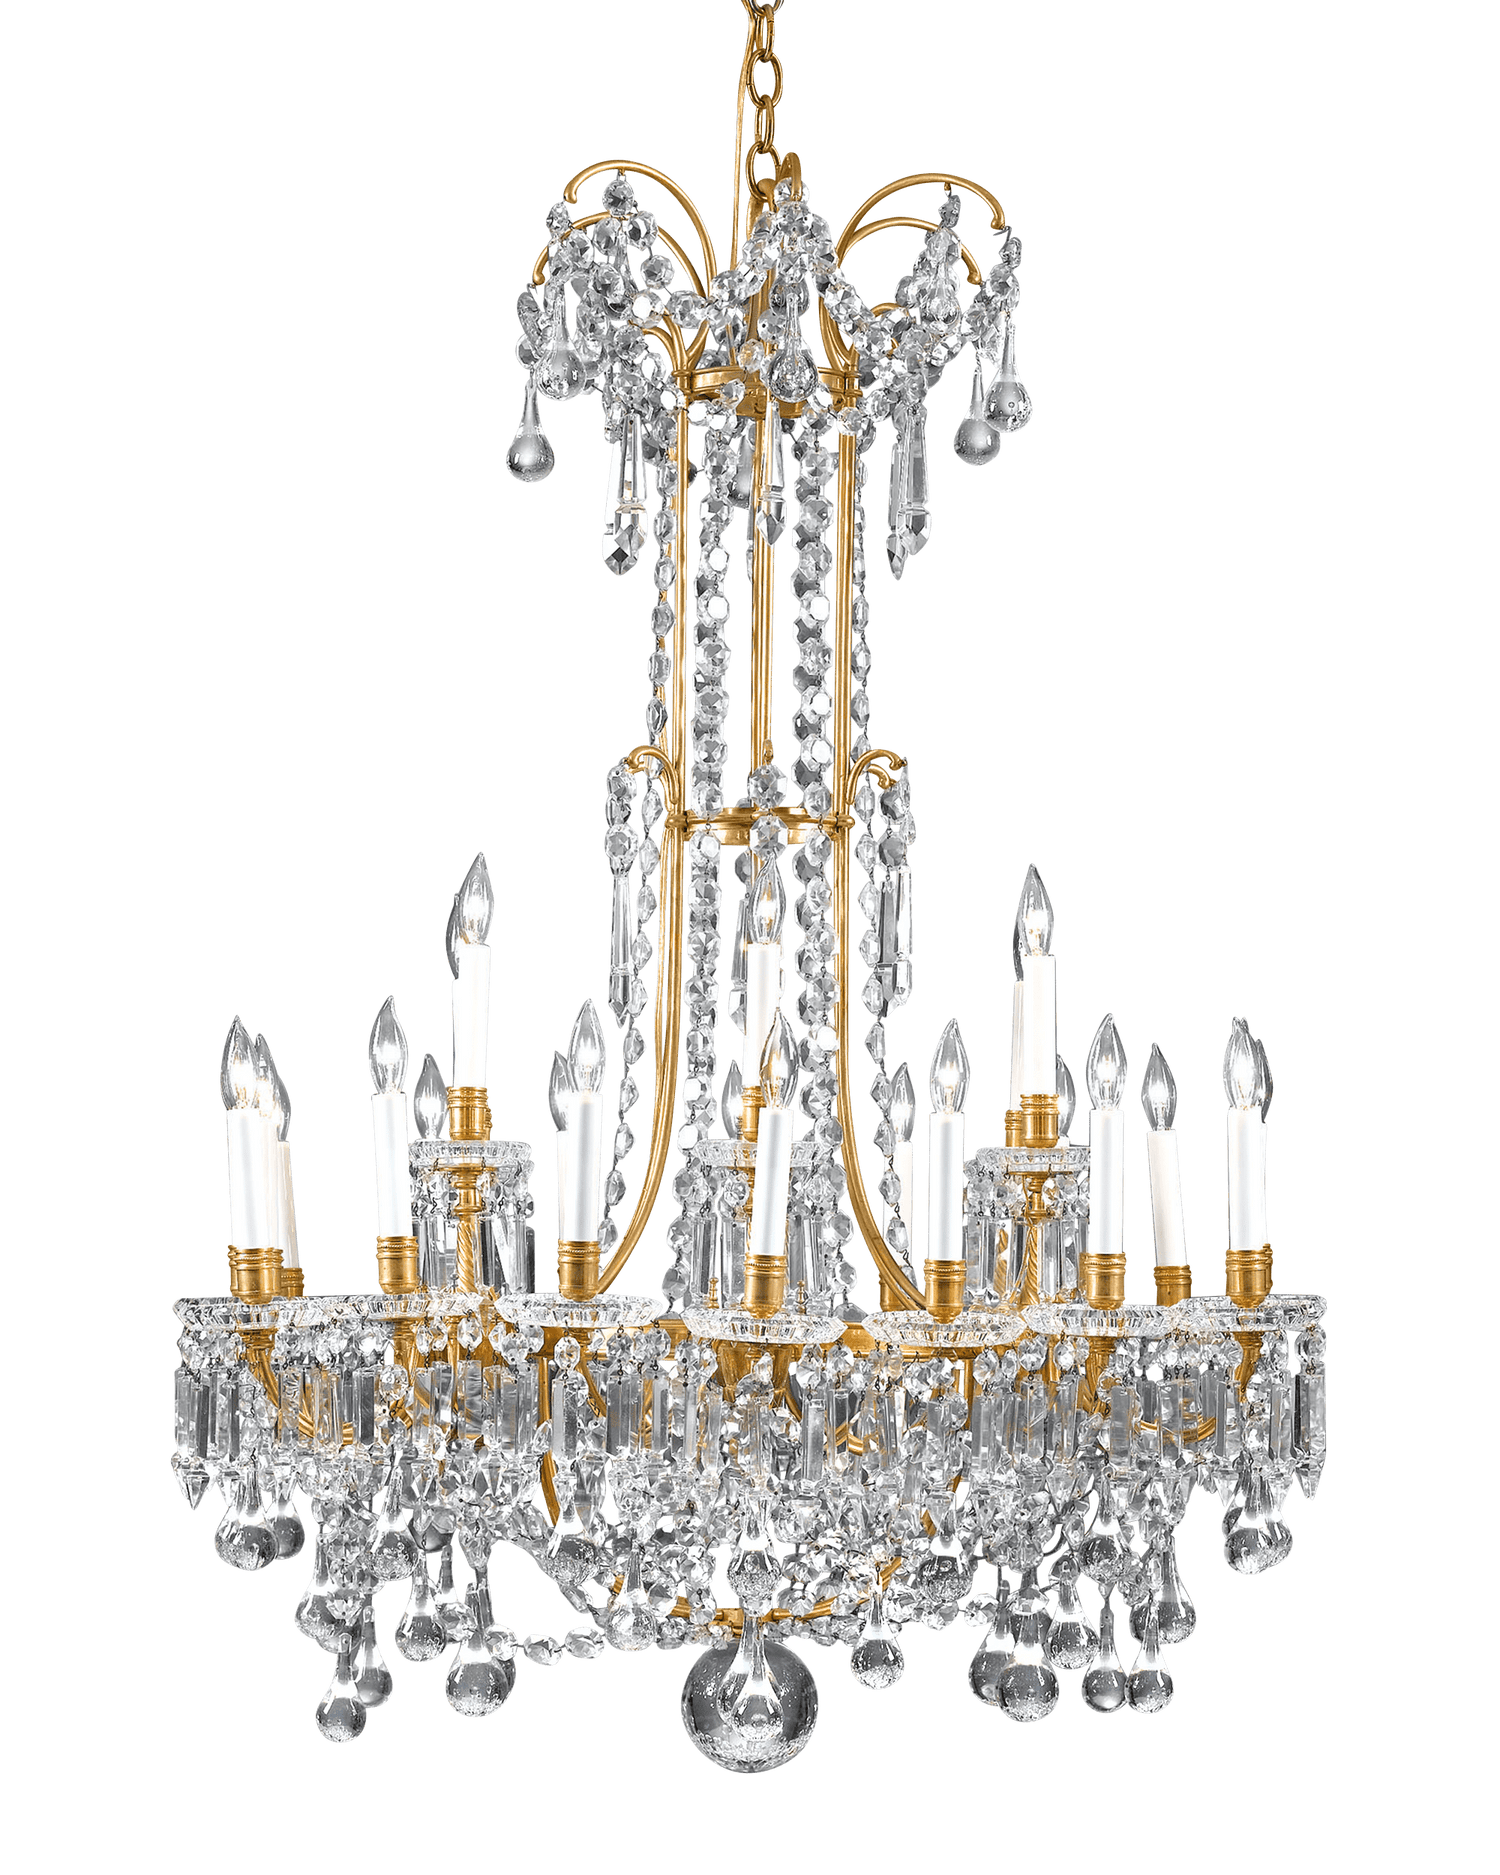 A grand 24-light crystal chandelier by the legendary firm of Baccarat